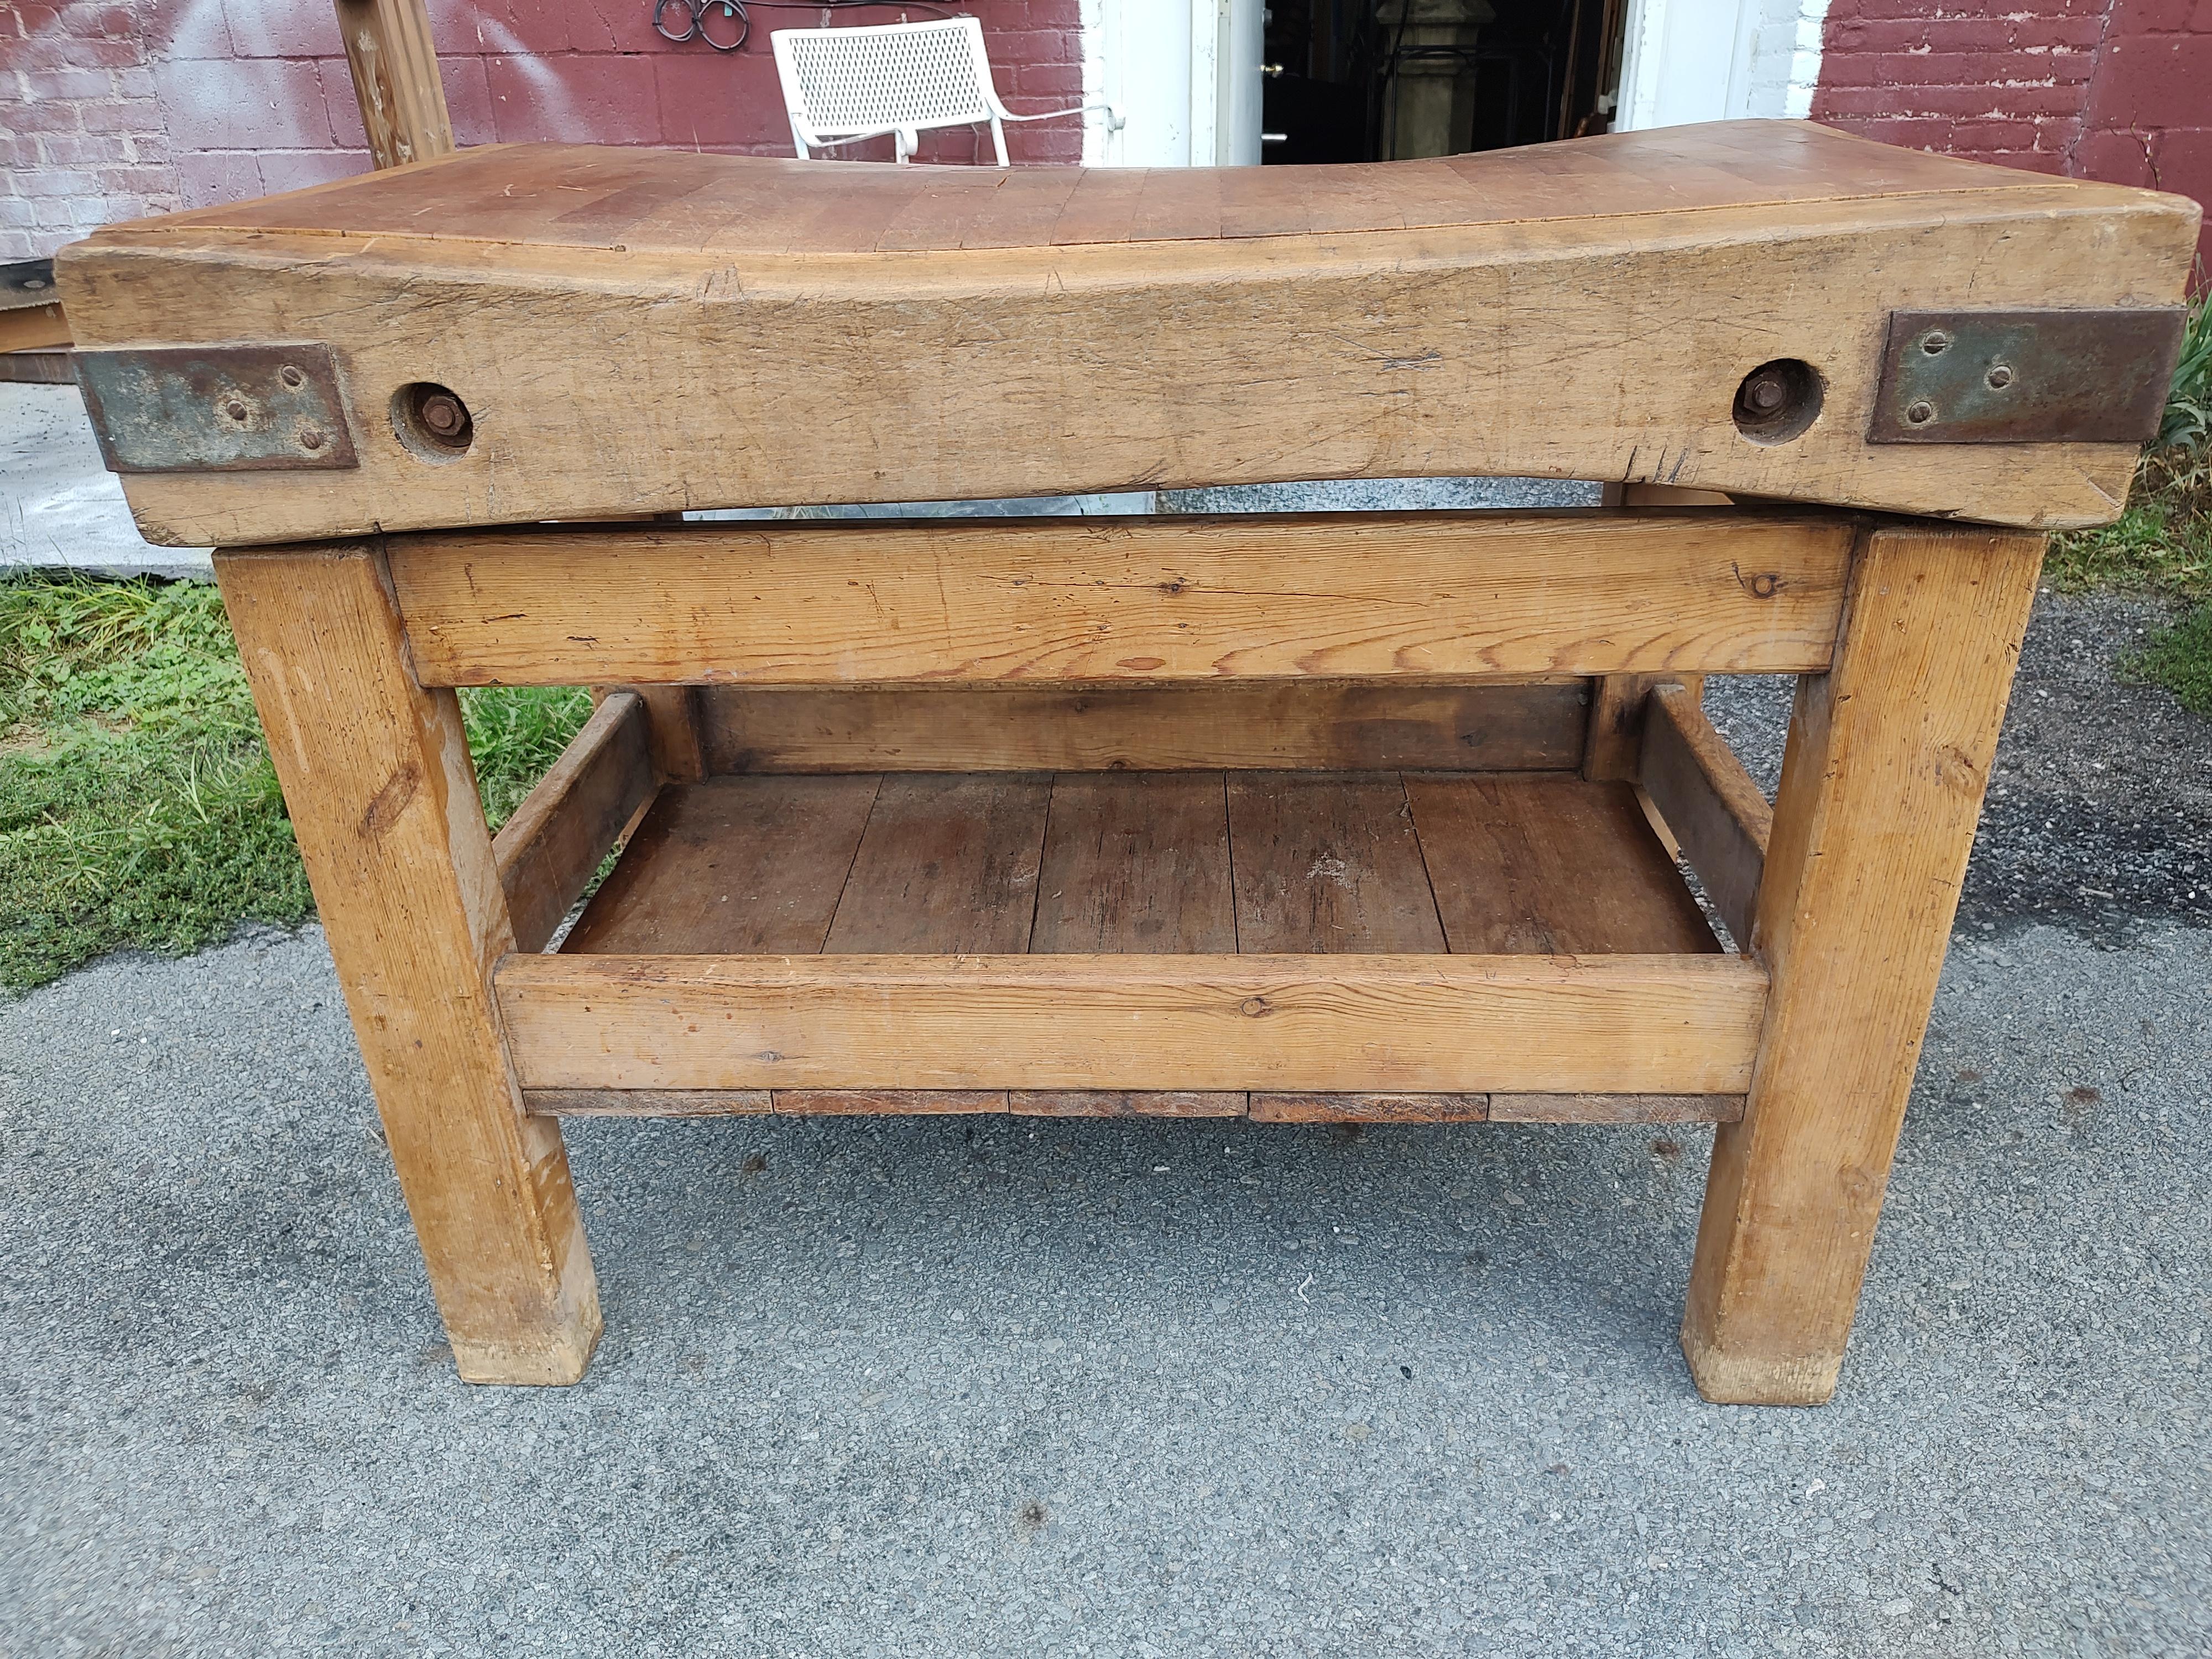 English 19th Century Industrial Butcher Block Table with Lower Shelf from England